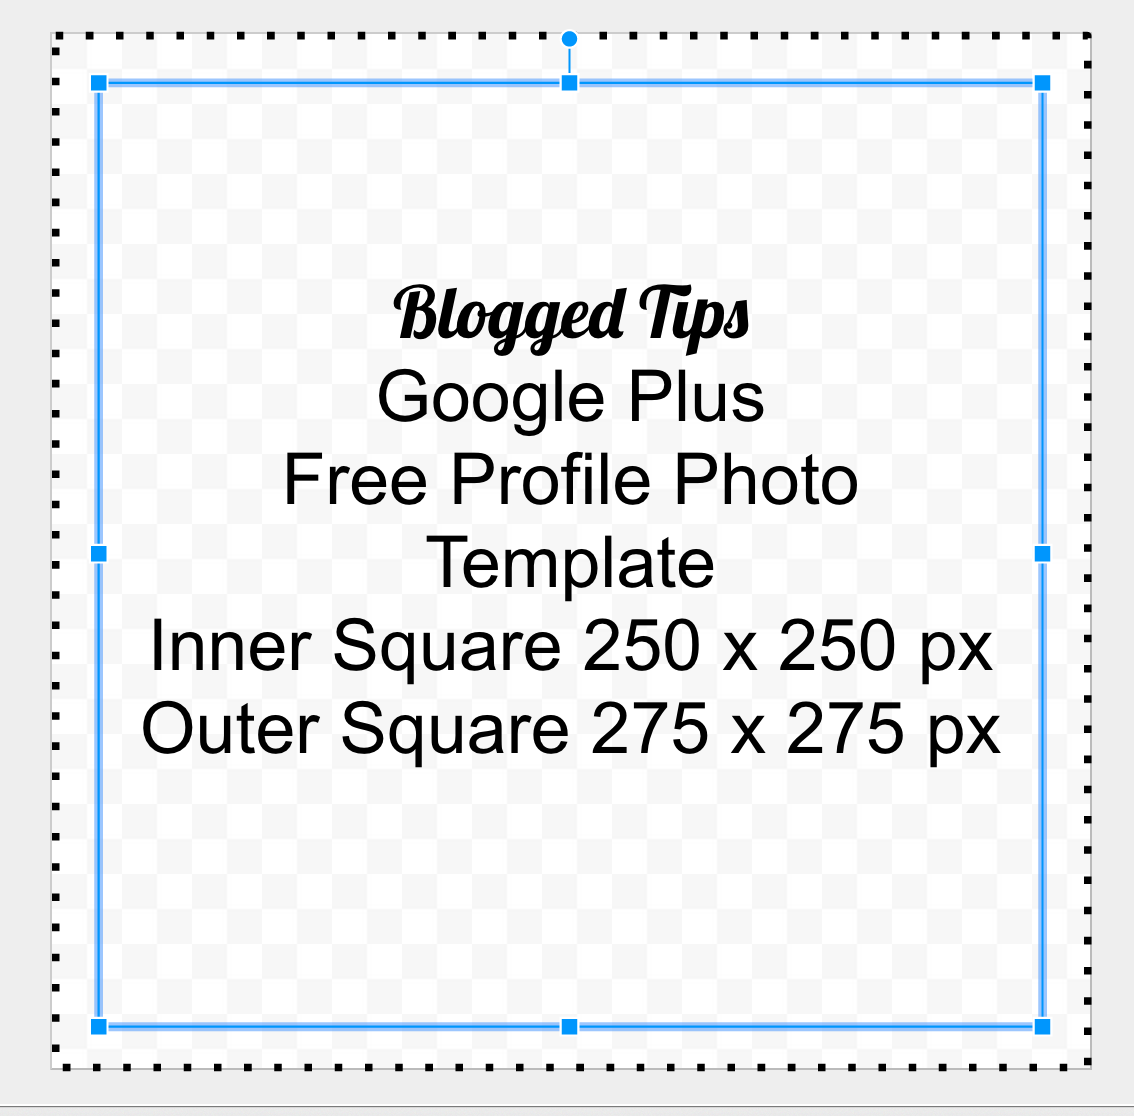 image Google Plus Free Profile Photo Template inner and outer